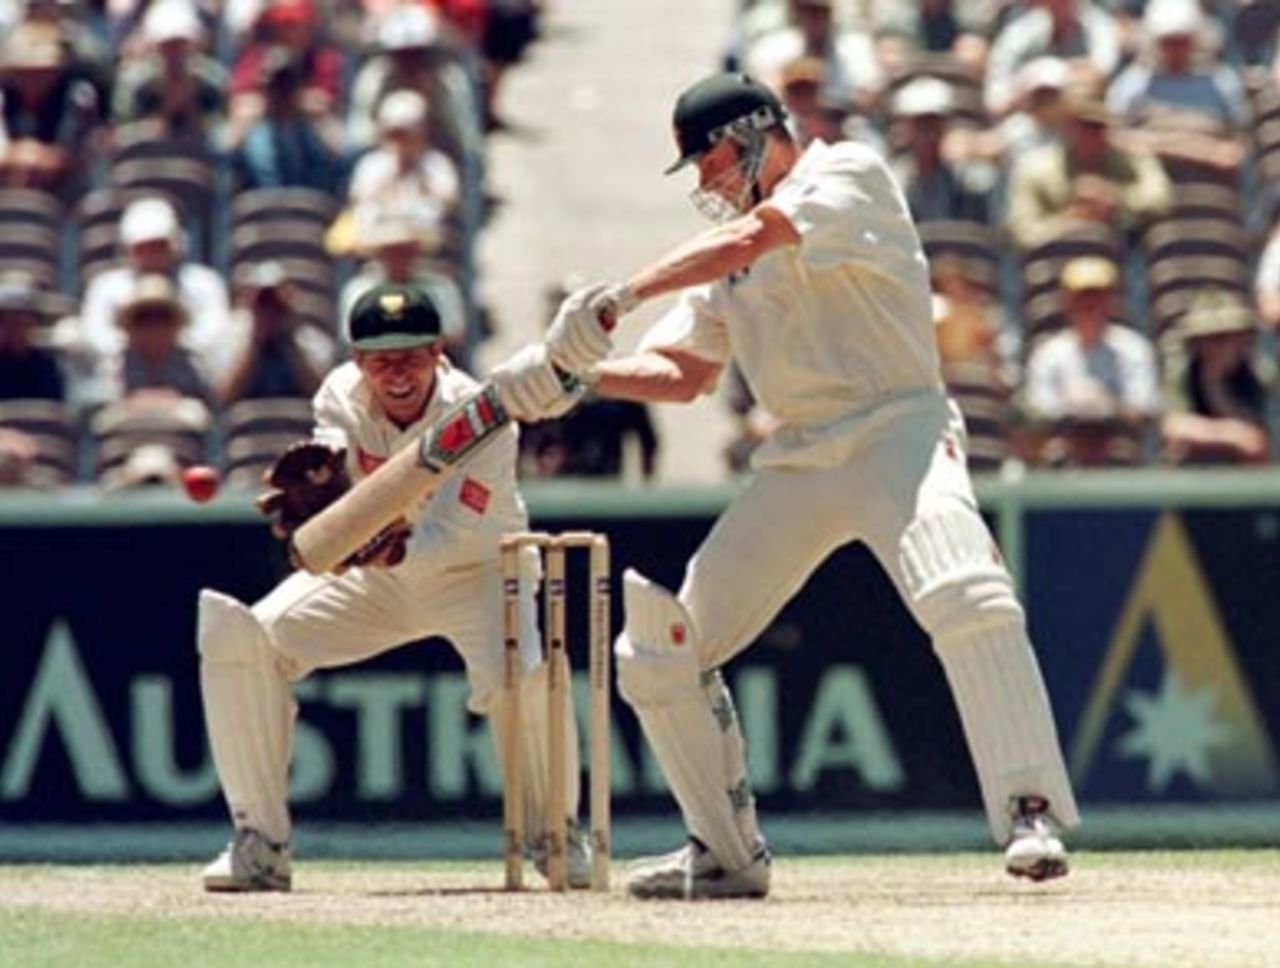 Paul Reiffel cuts on his way to an unbeaten 79 during the 4th day of the Australia v South Africa Test match at the MCG in Melbourne. December 29th 1997.